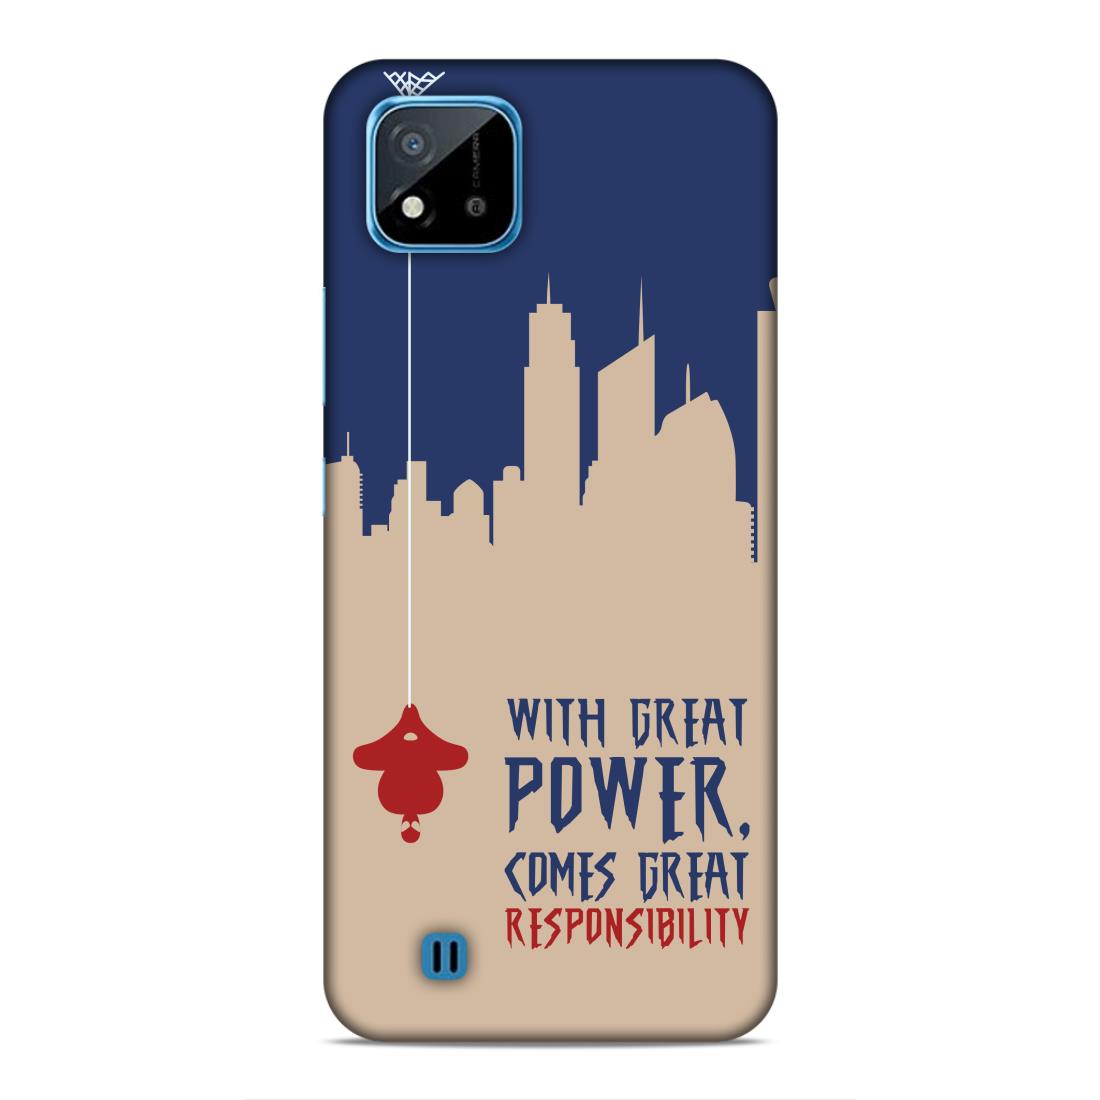 Great Power Comes Great Responsibility Hard Back Case For Realme C20 / C11 2021